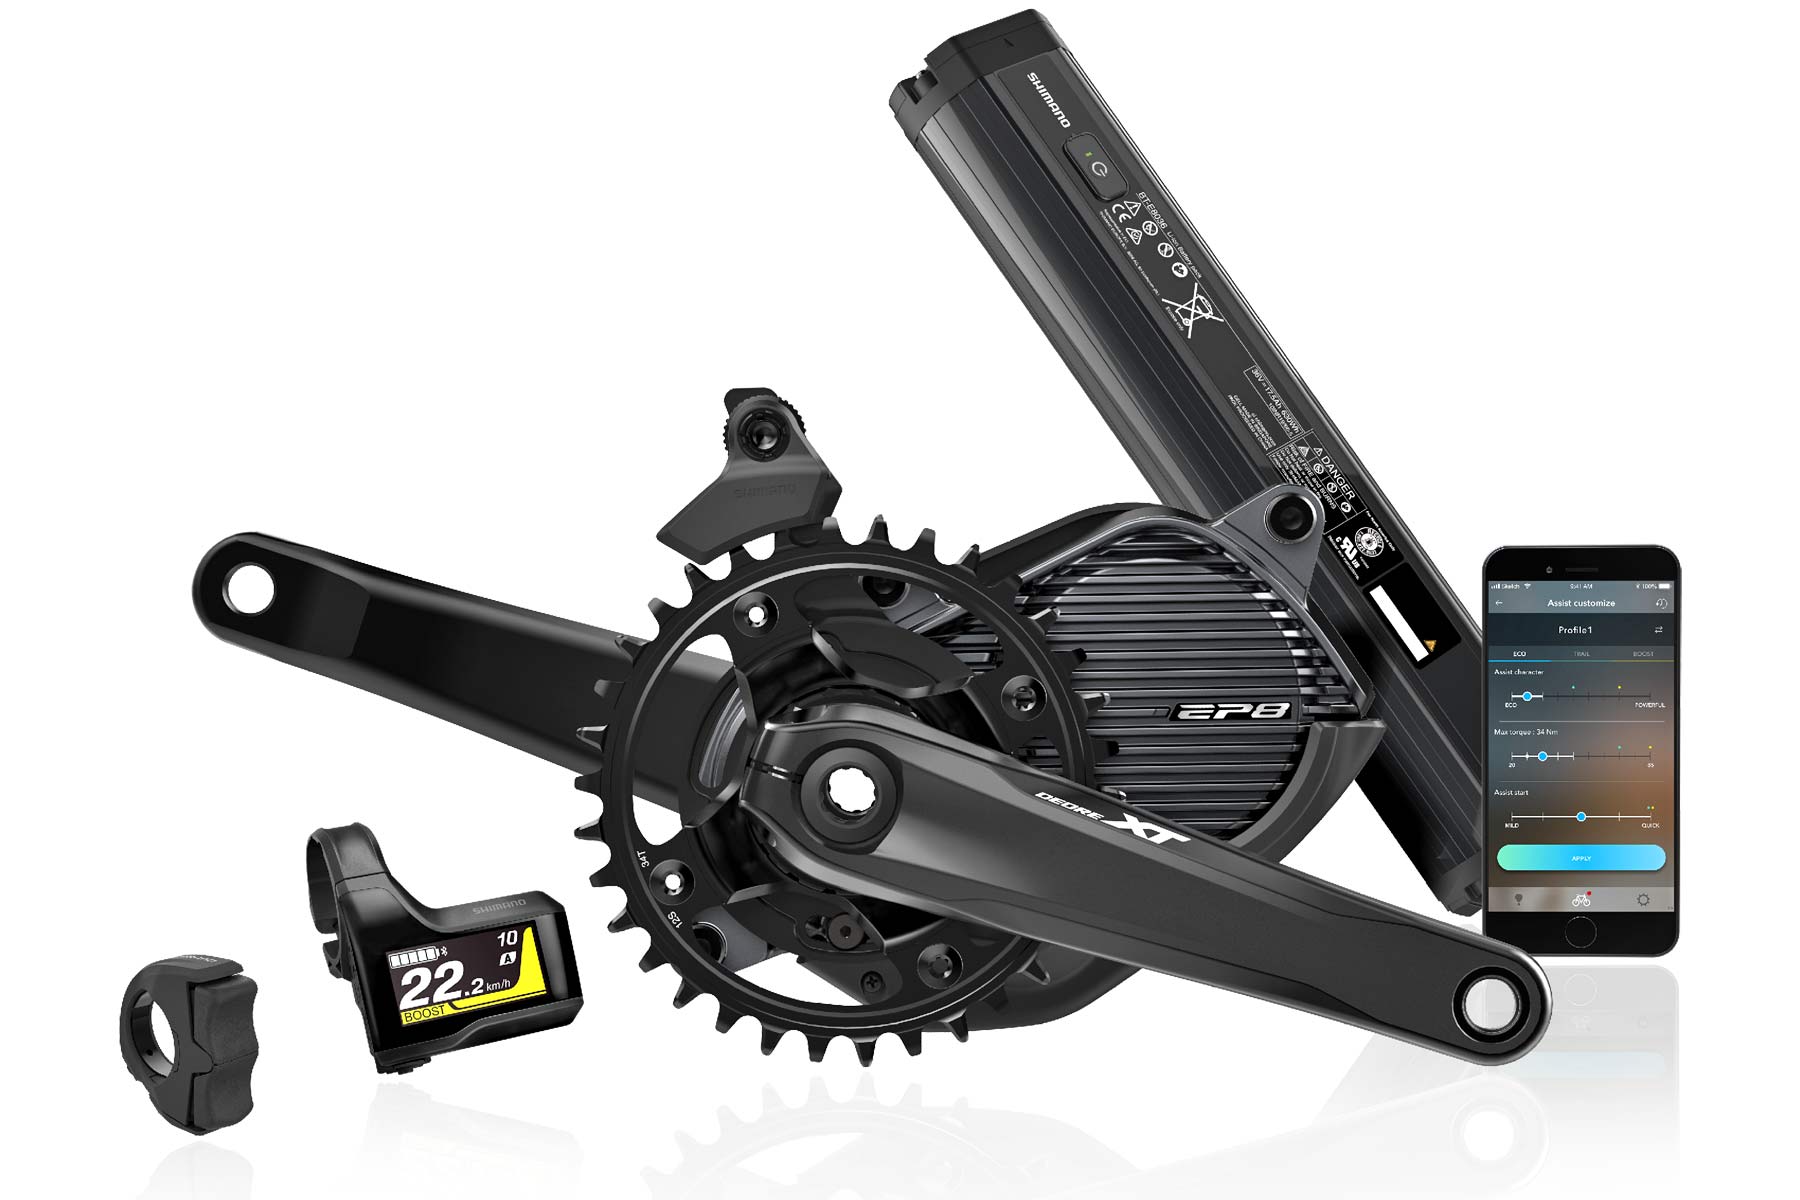 Shimano EP8 system